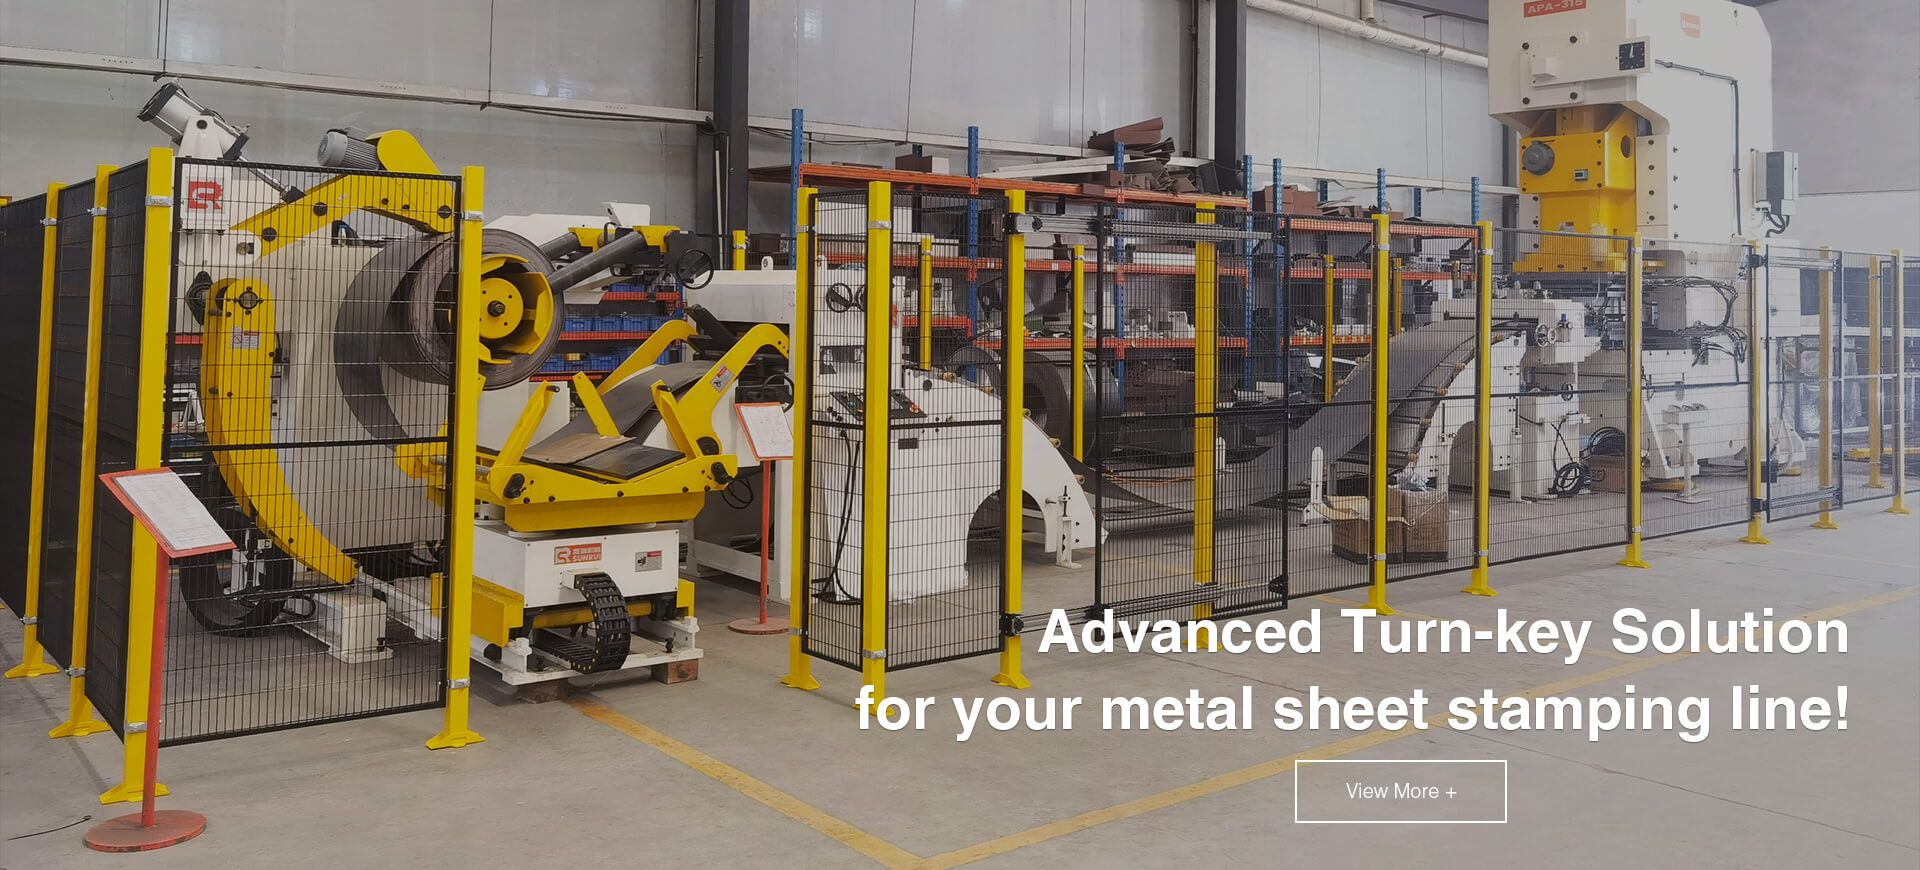 Advanced Turn-key Solution for your metal sheet stamping line!